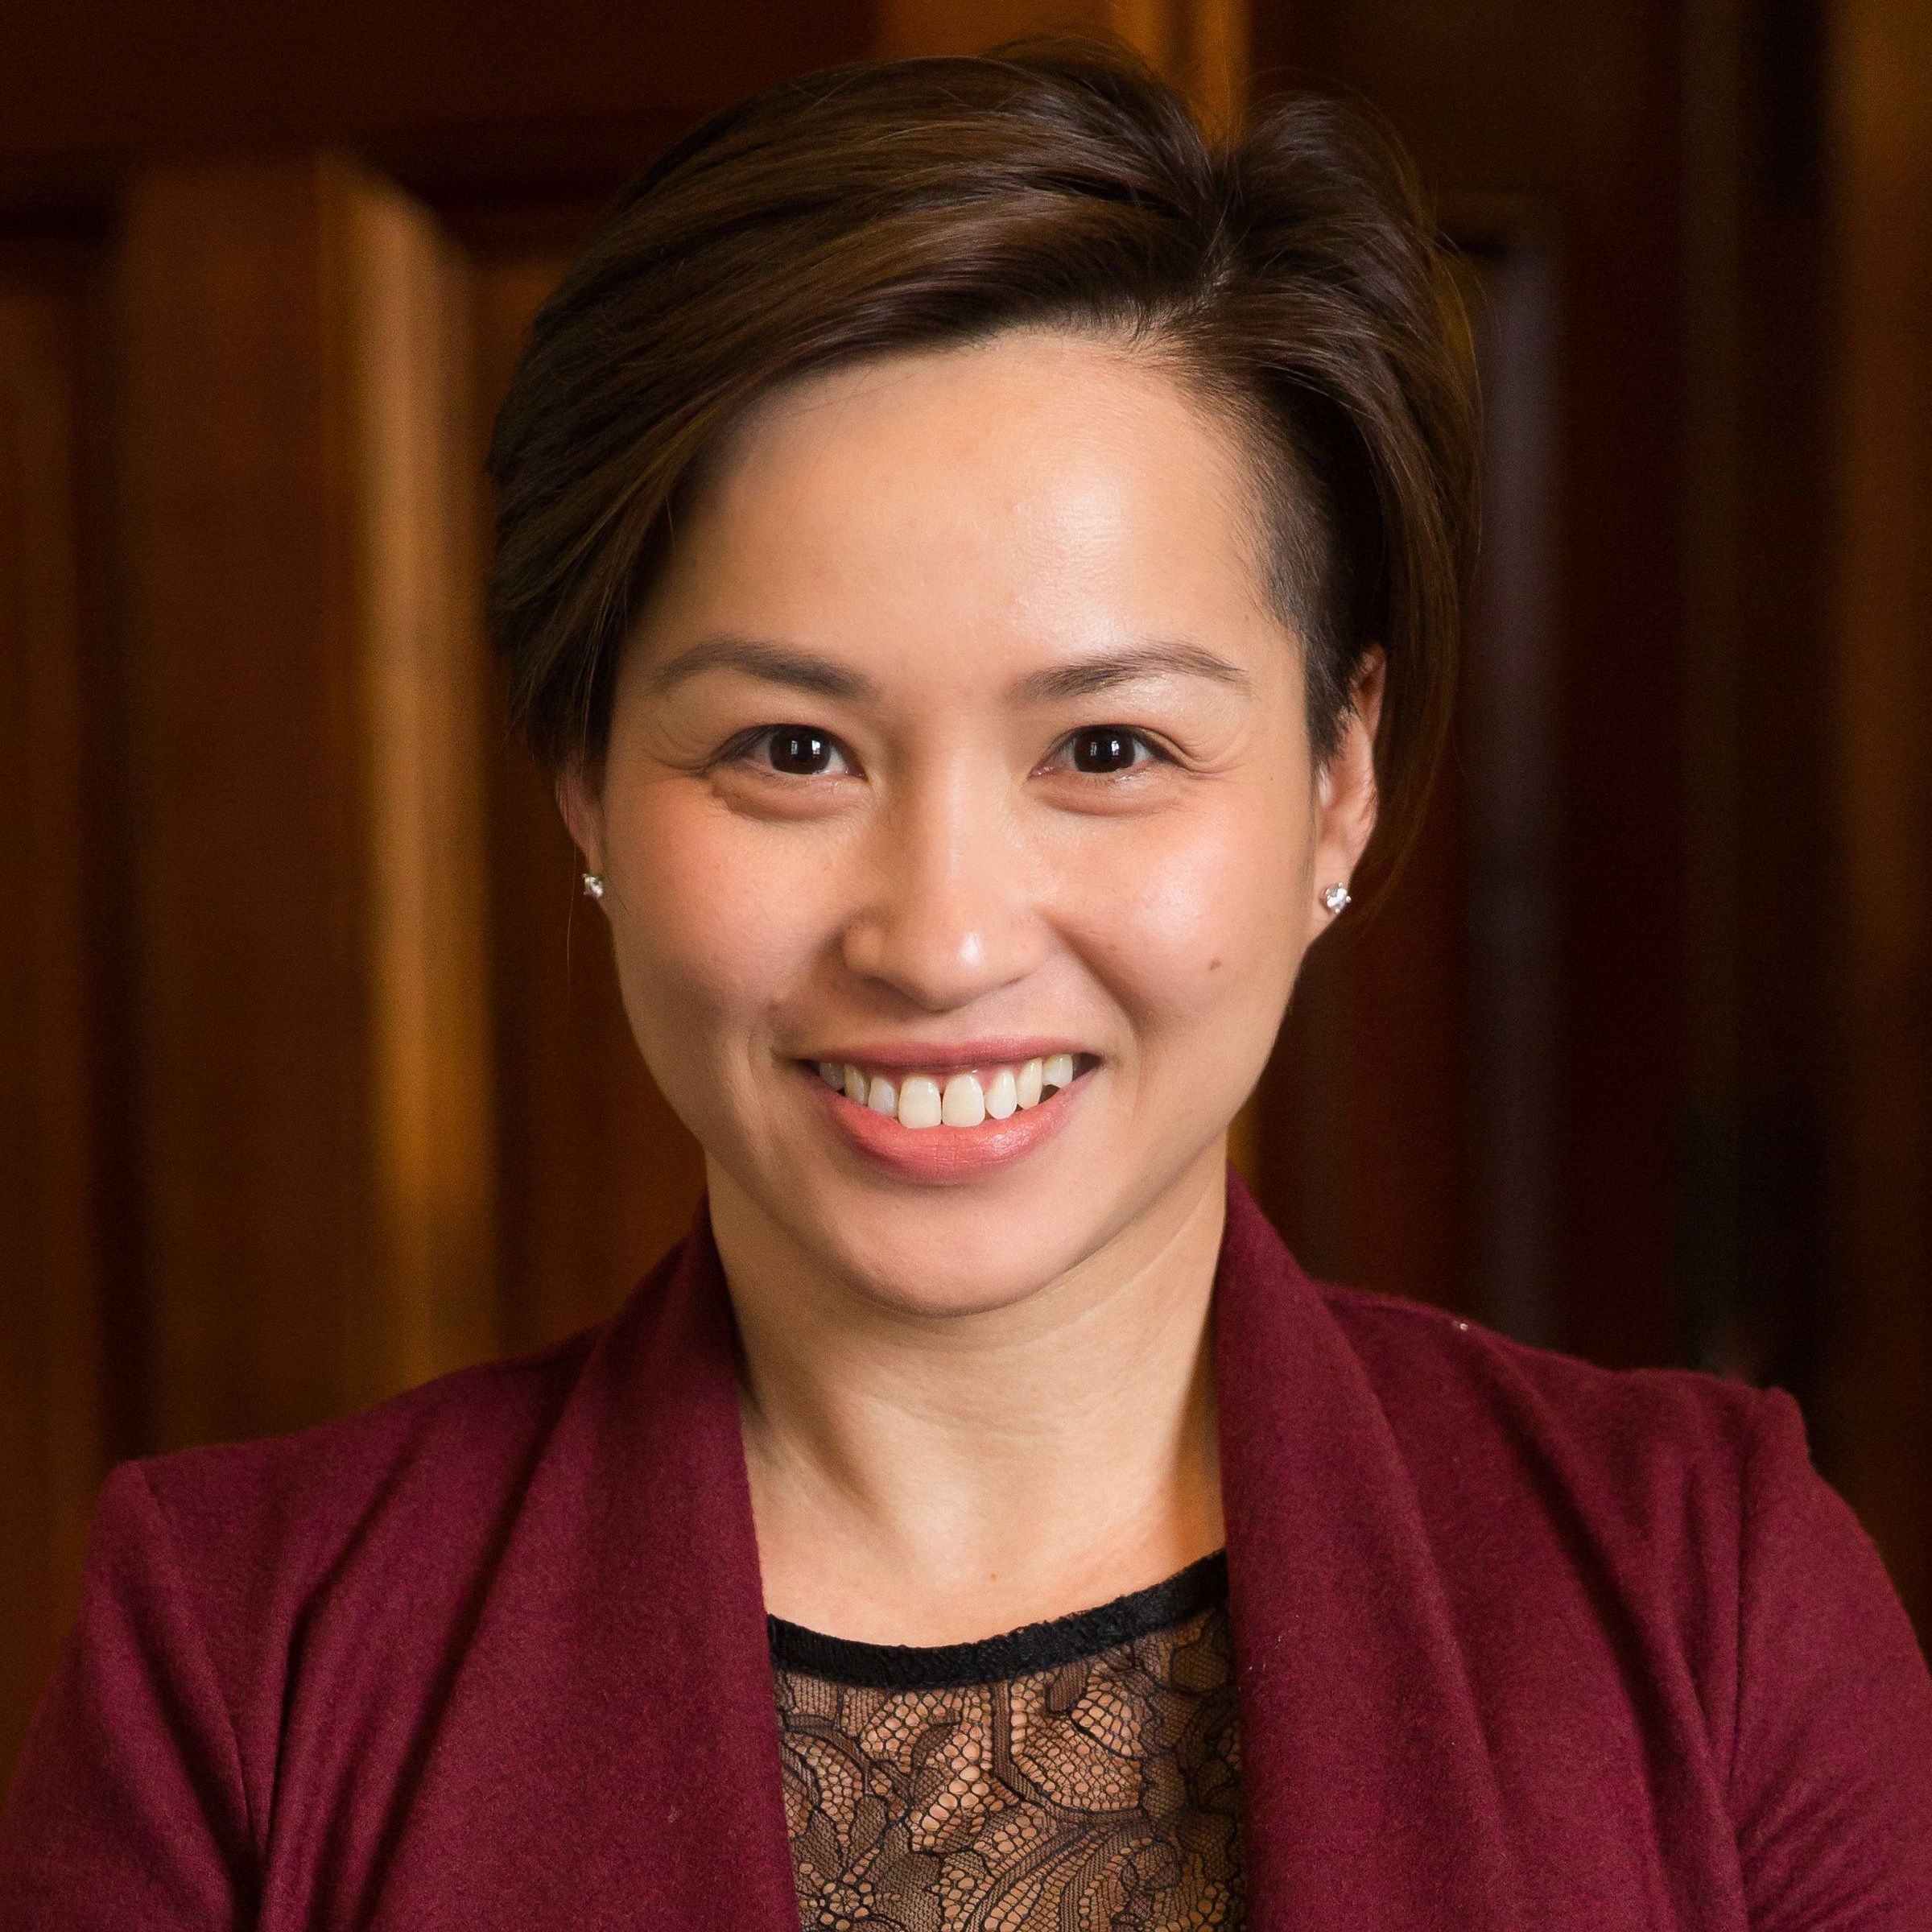 Asian woman with short styled brown hair wears a maroon jacket and black lace top smiles